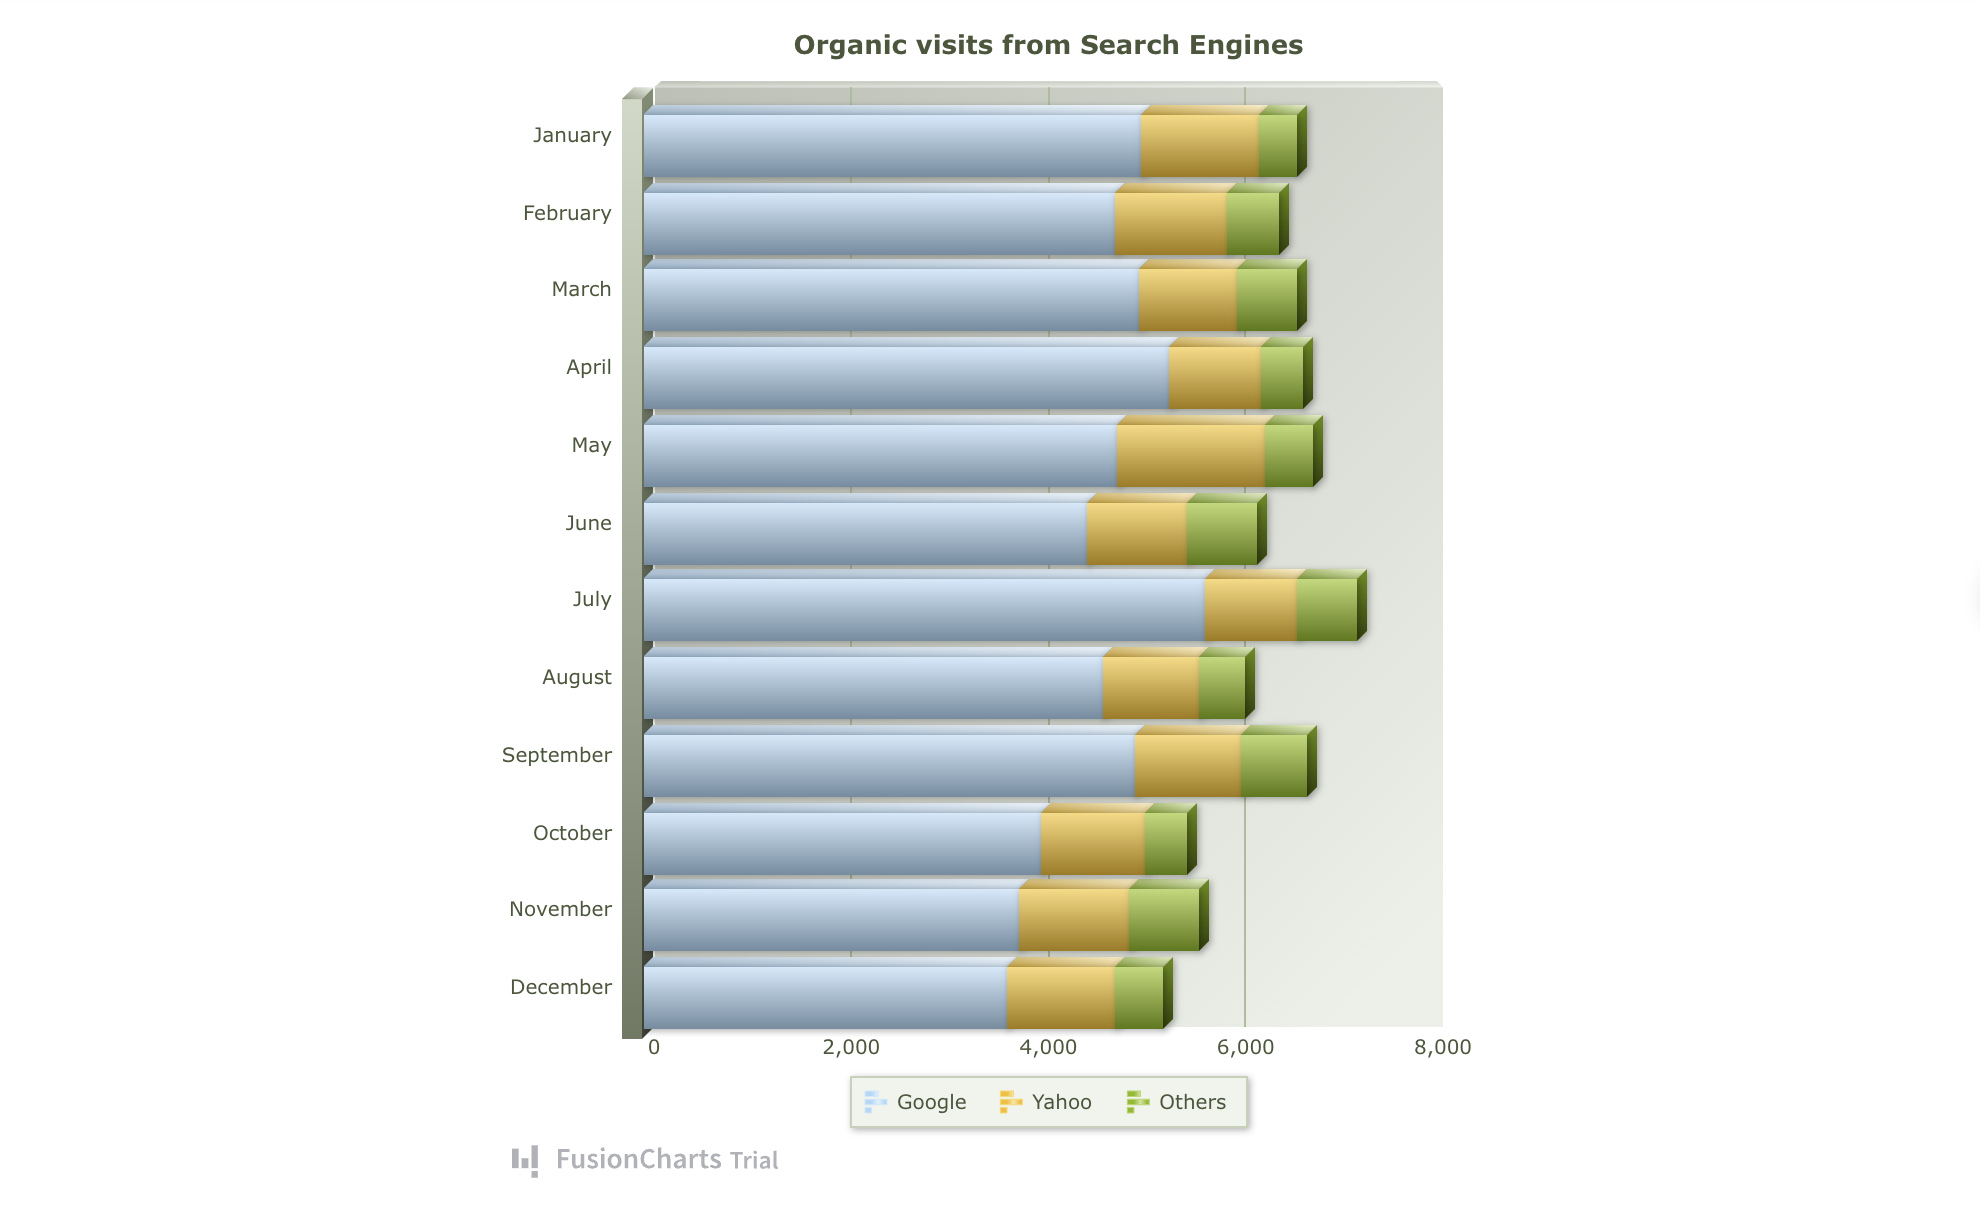 3D stacked bar chart - organic visits from search engines